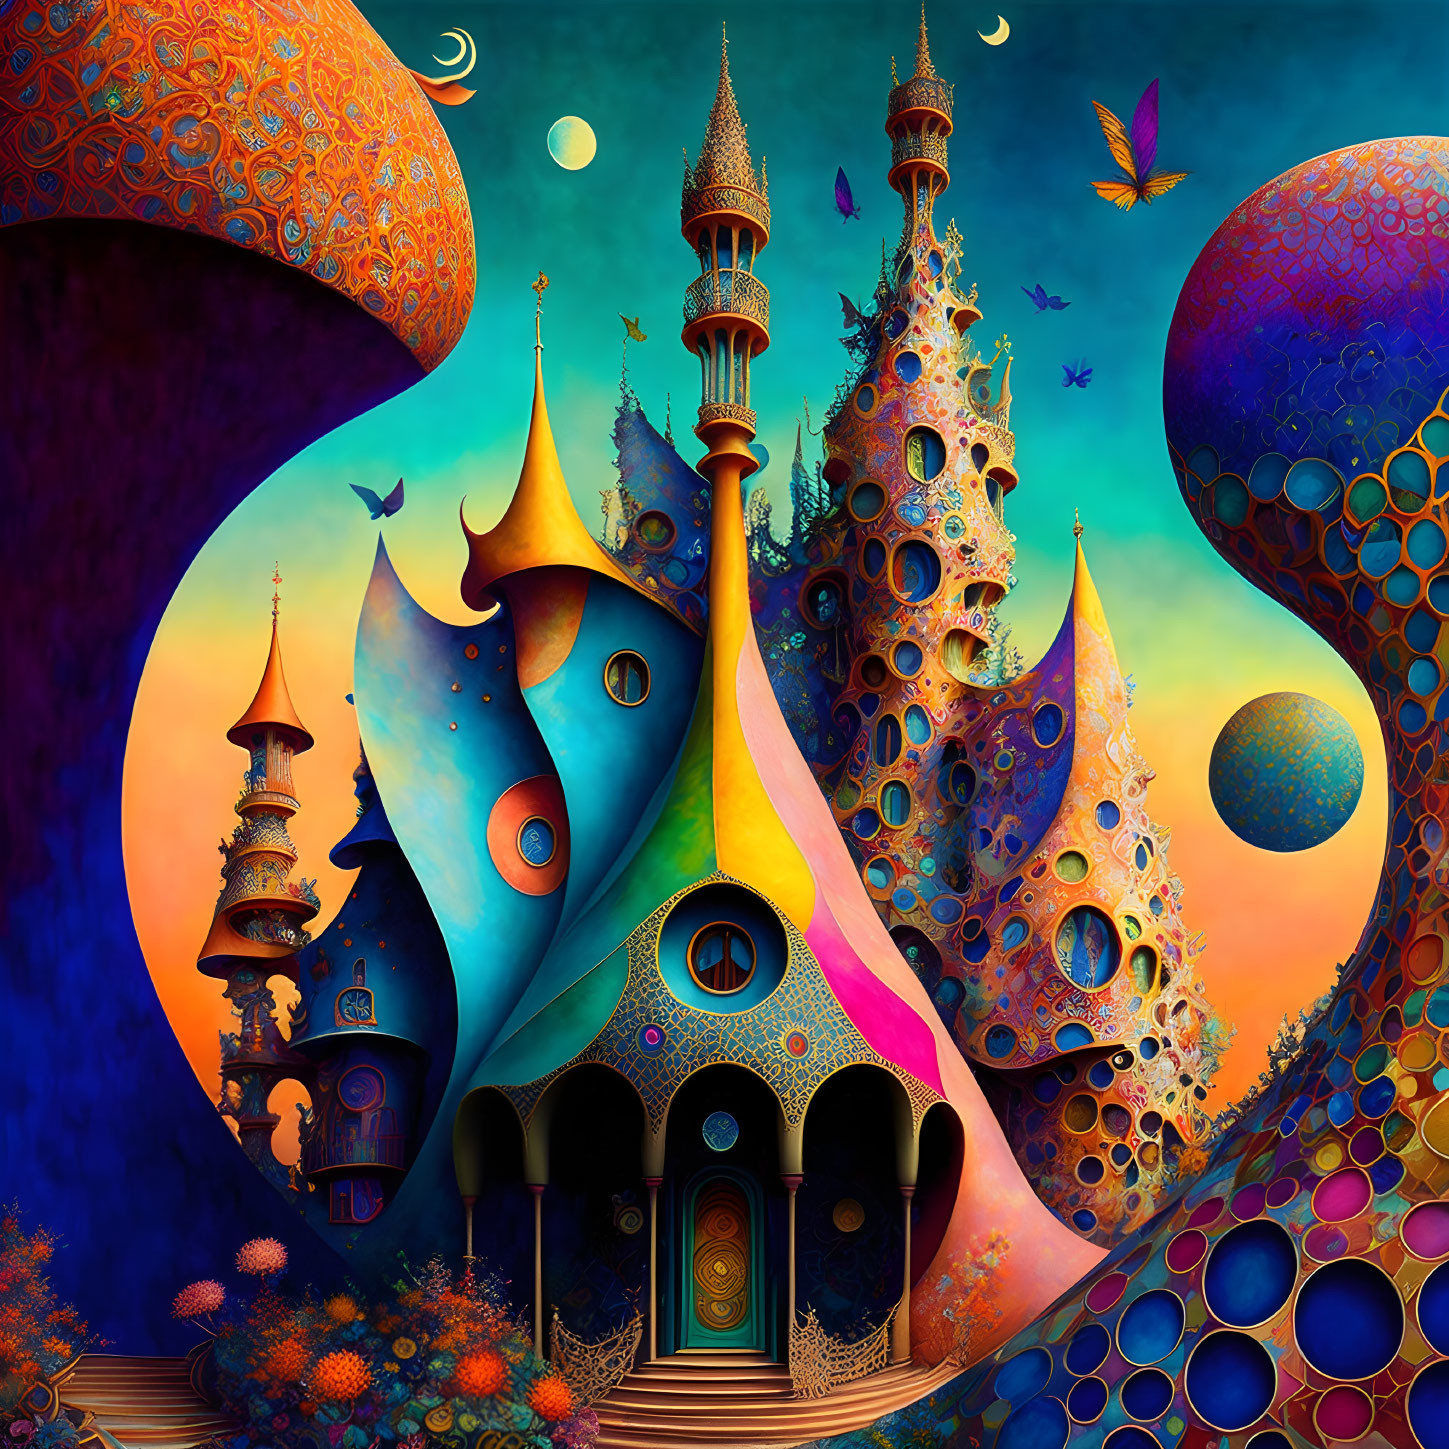 Colorful Fantasy Landscape with Whimsical Castles & Celestial Bodies